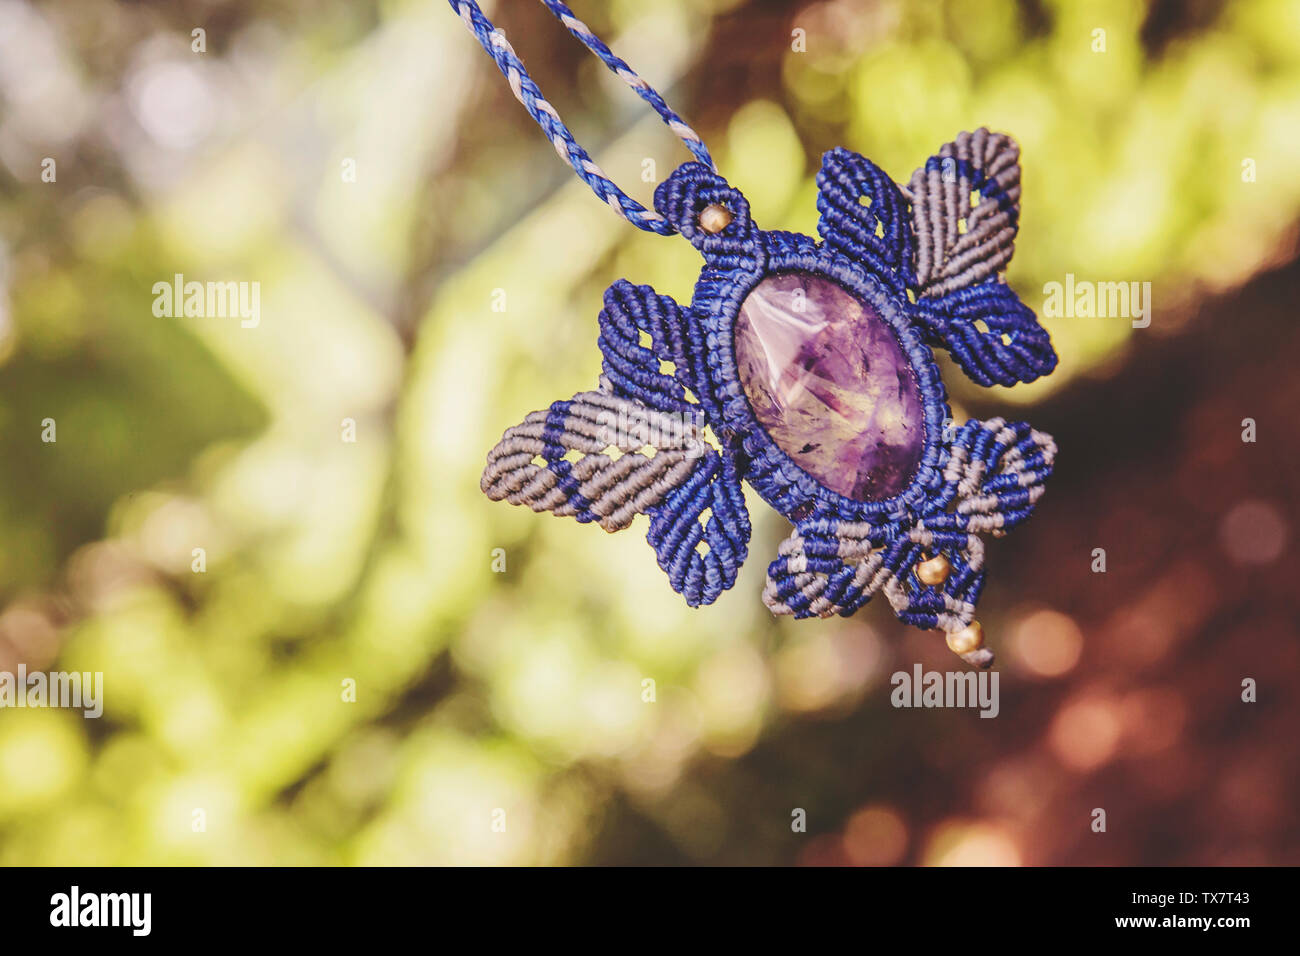 Macrame necklace with amethyst stone on natural background Stock Photo